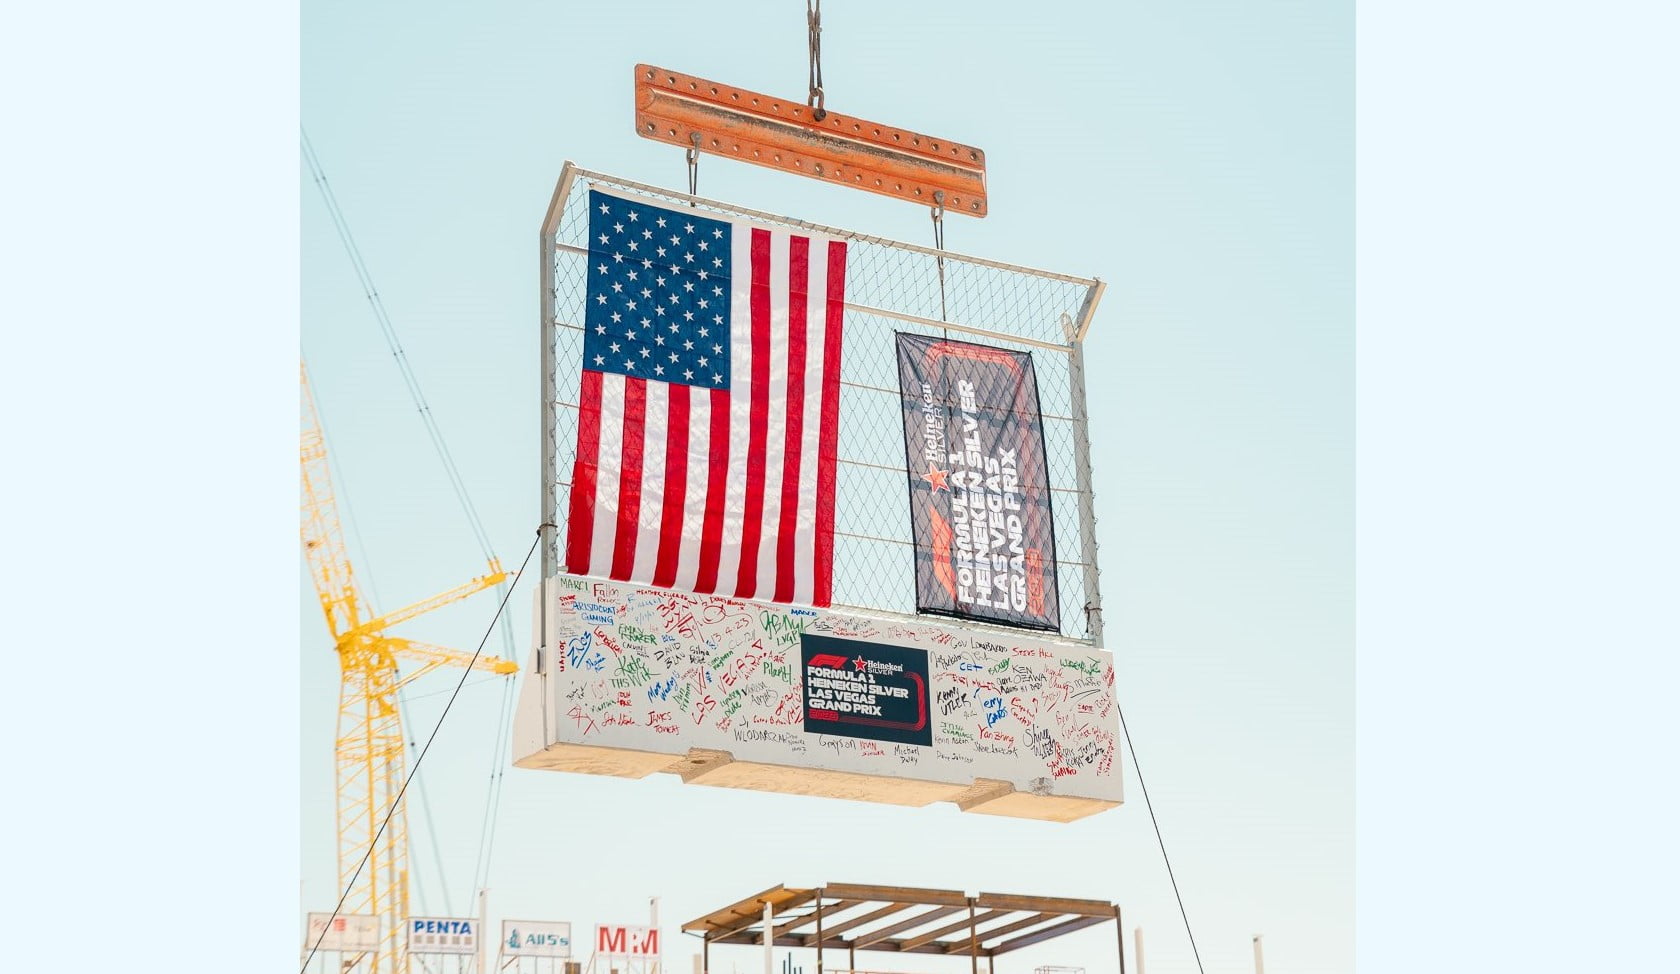 The Las Vegas Grand Prix will be the third race hosted by the United States of America. The race is expected to have the finest hospitality and ticket options.